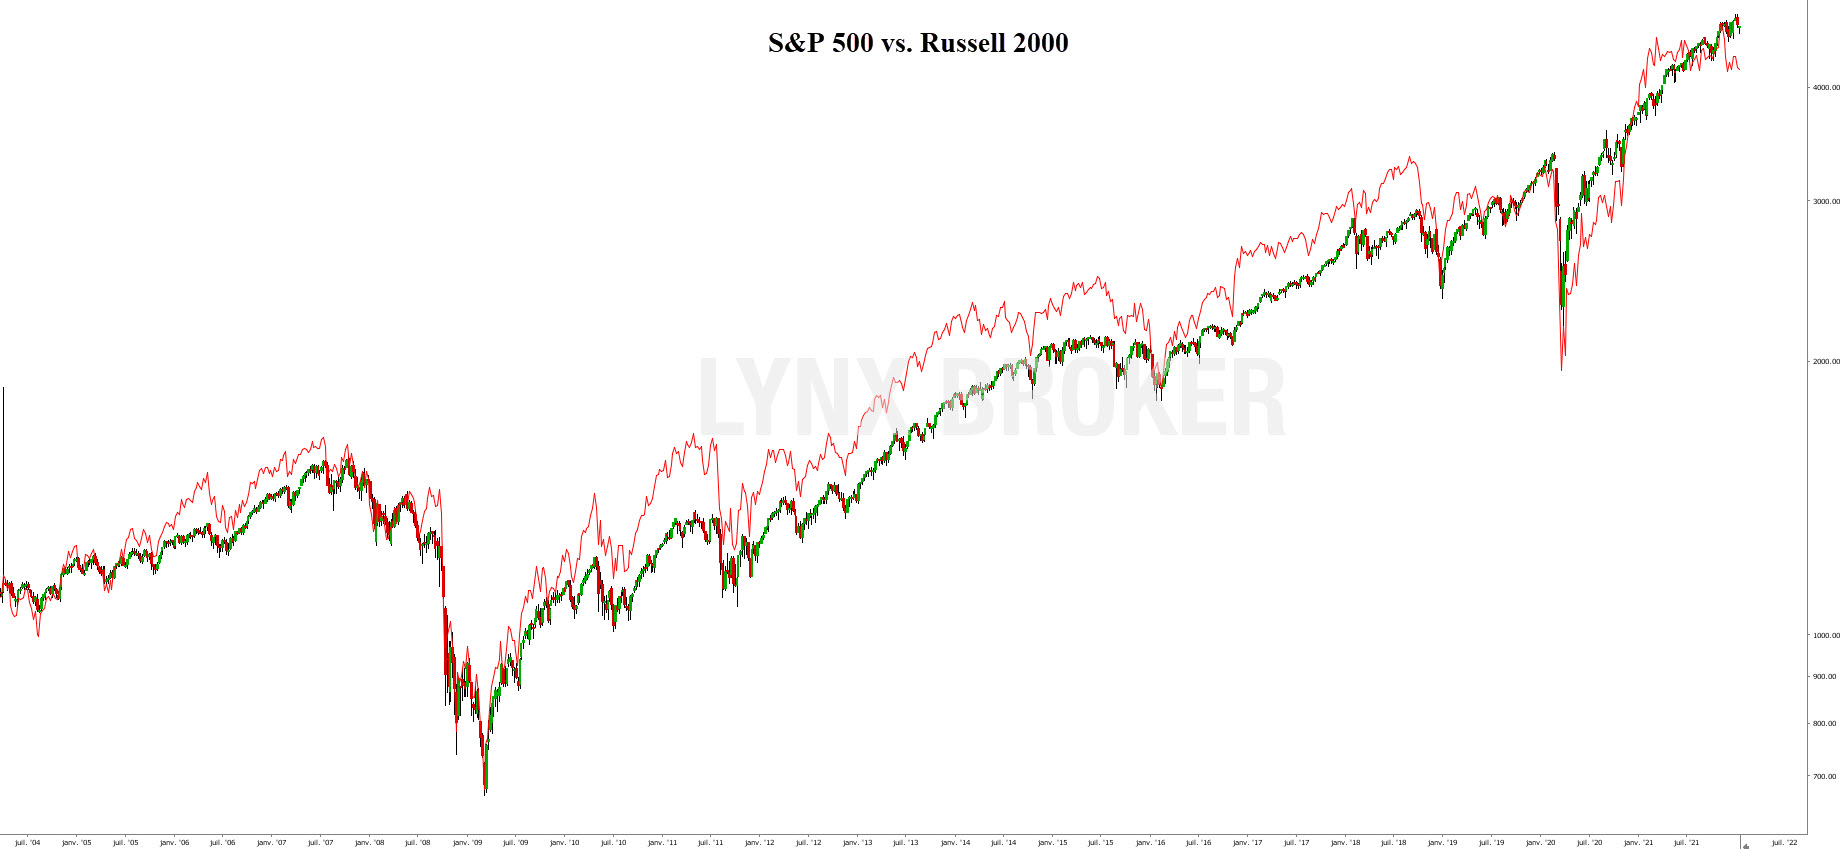 small caps - us small cap - S&P 500 vs Russell 2000